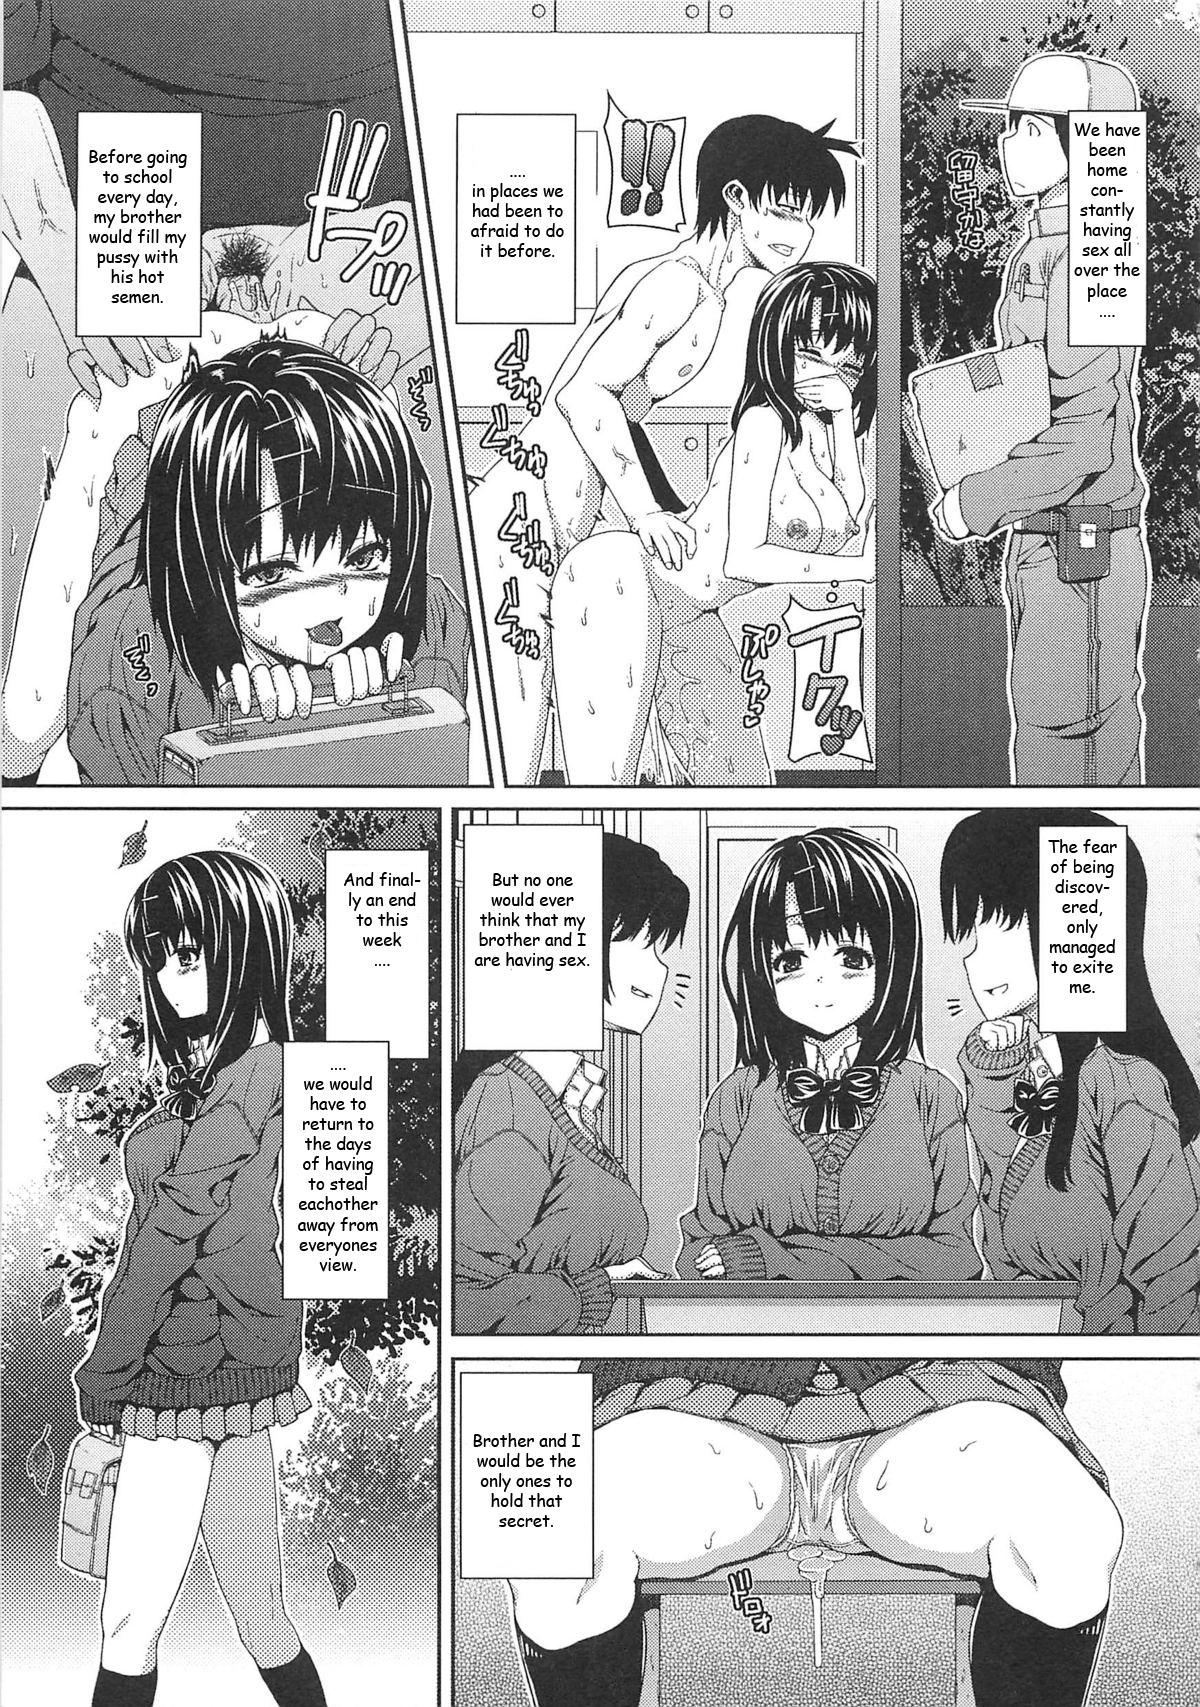 Hermana Imouto Seven Days Footworship - Page 9